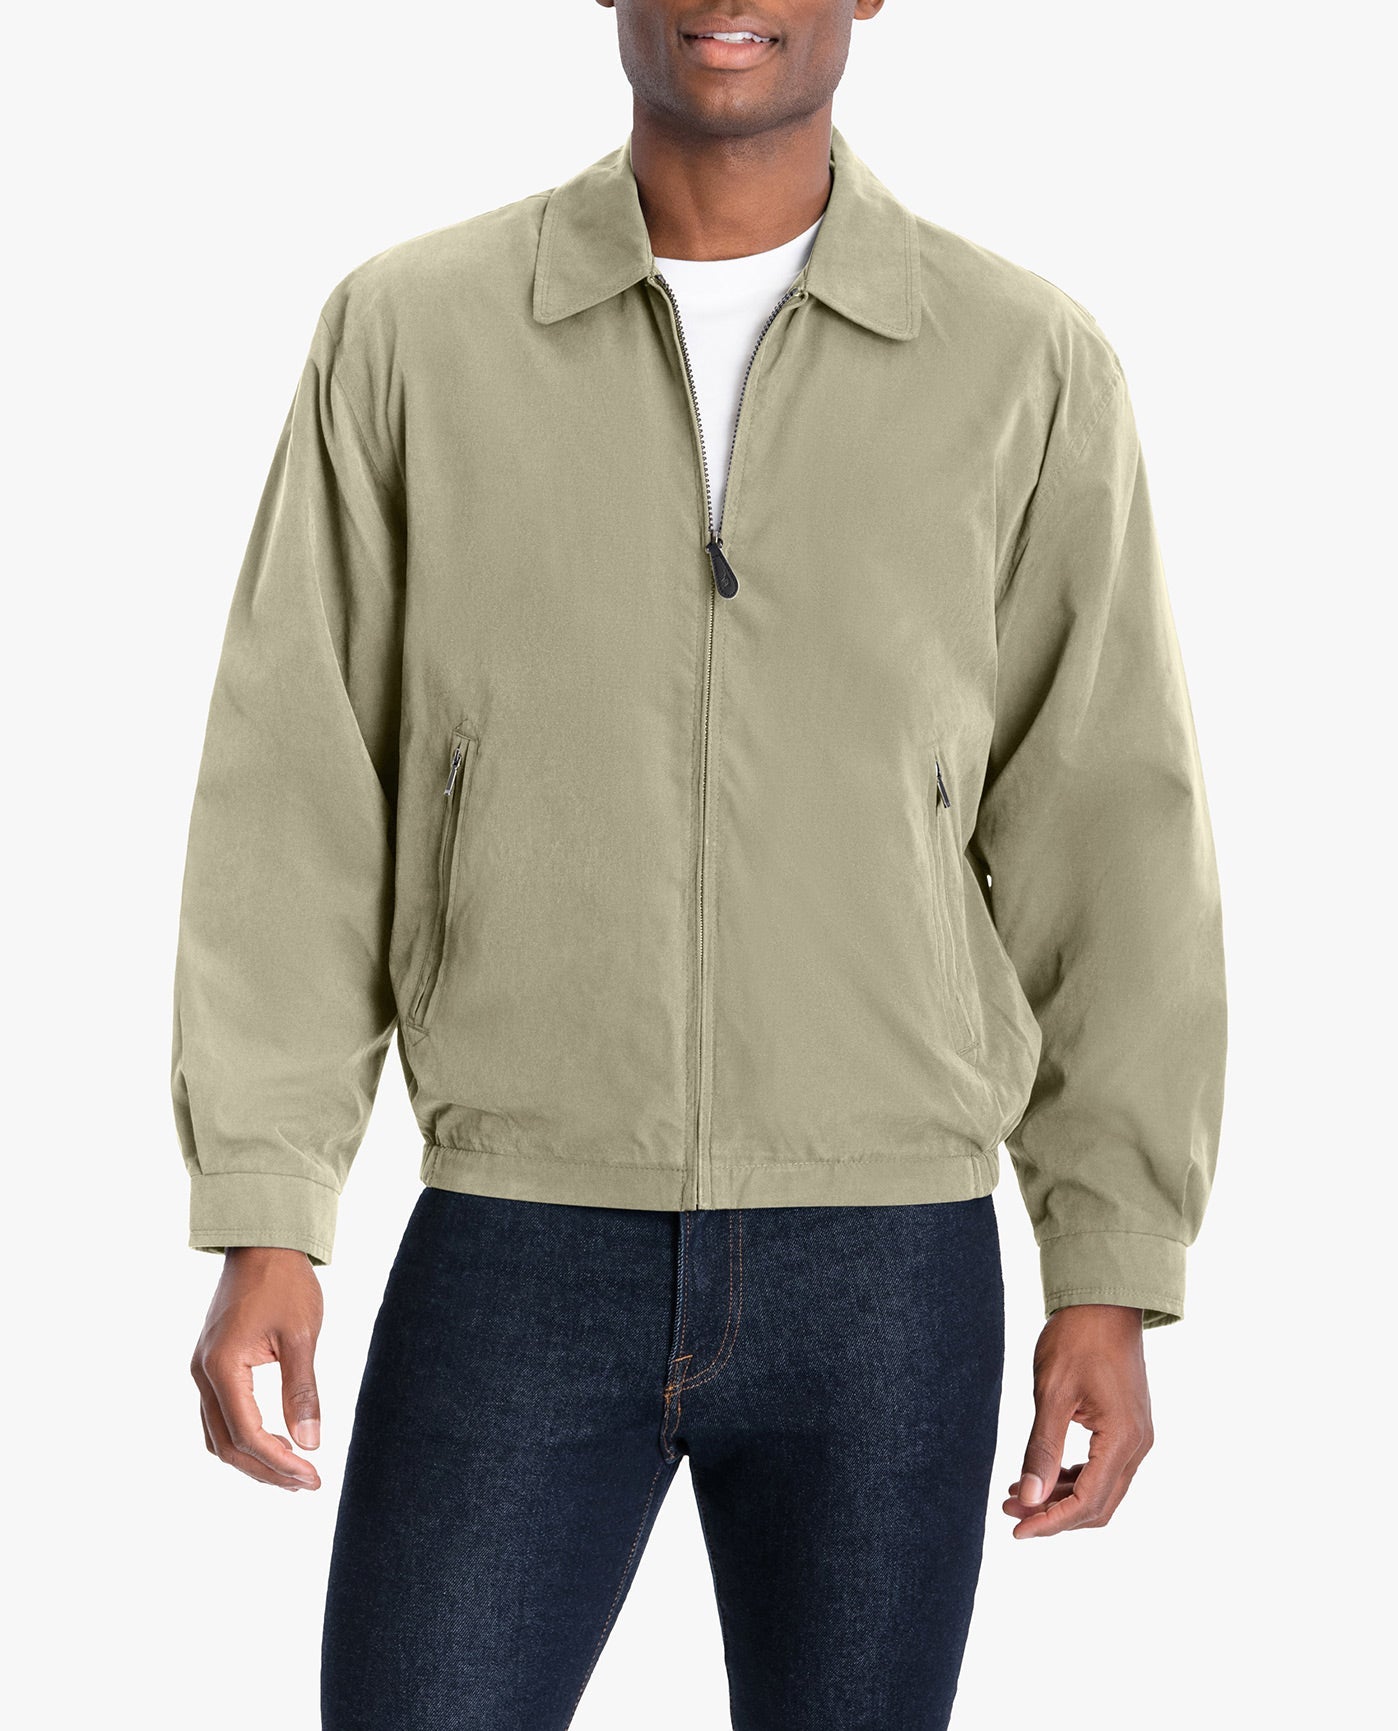 FRONT VIEW OF TALL LIGHT WEIGHT ZIP FRONT GOLF JACKET | CEMENT